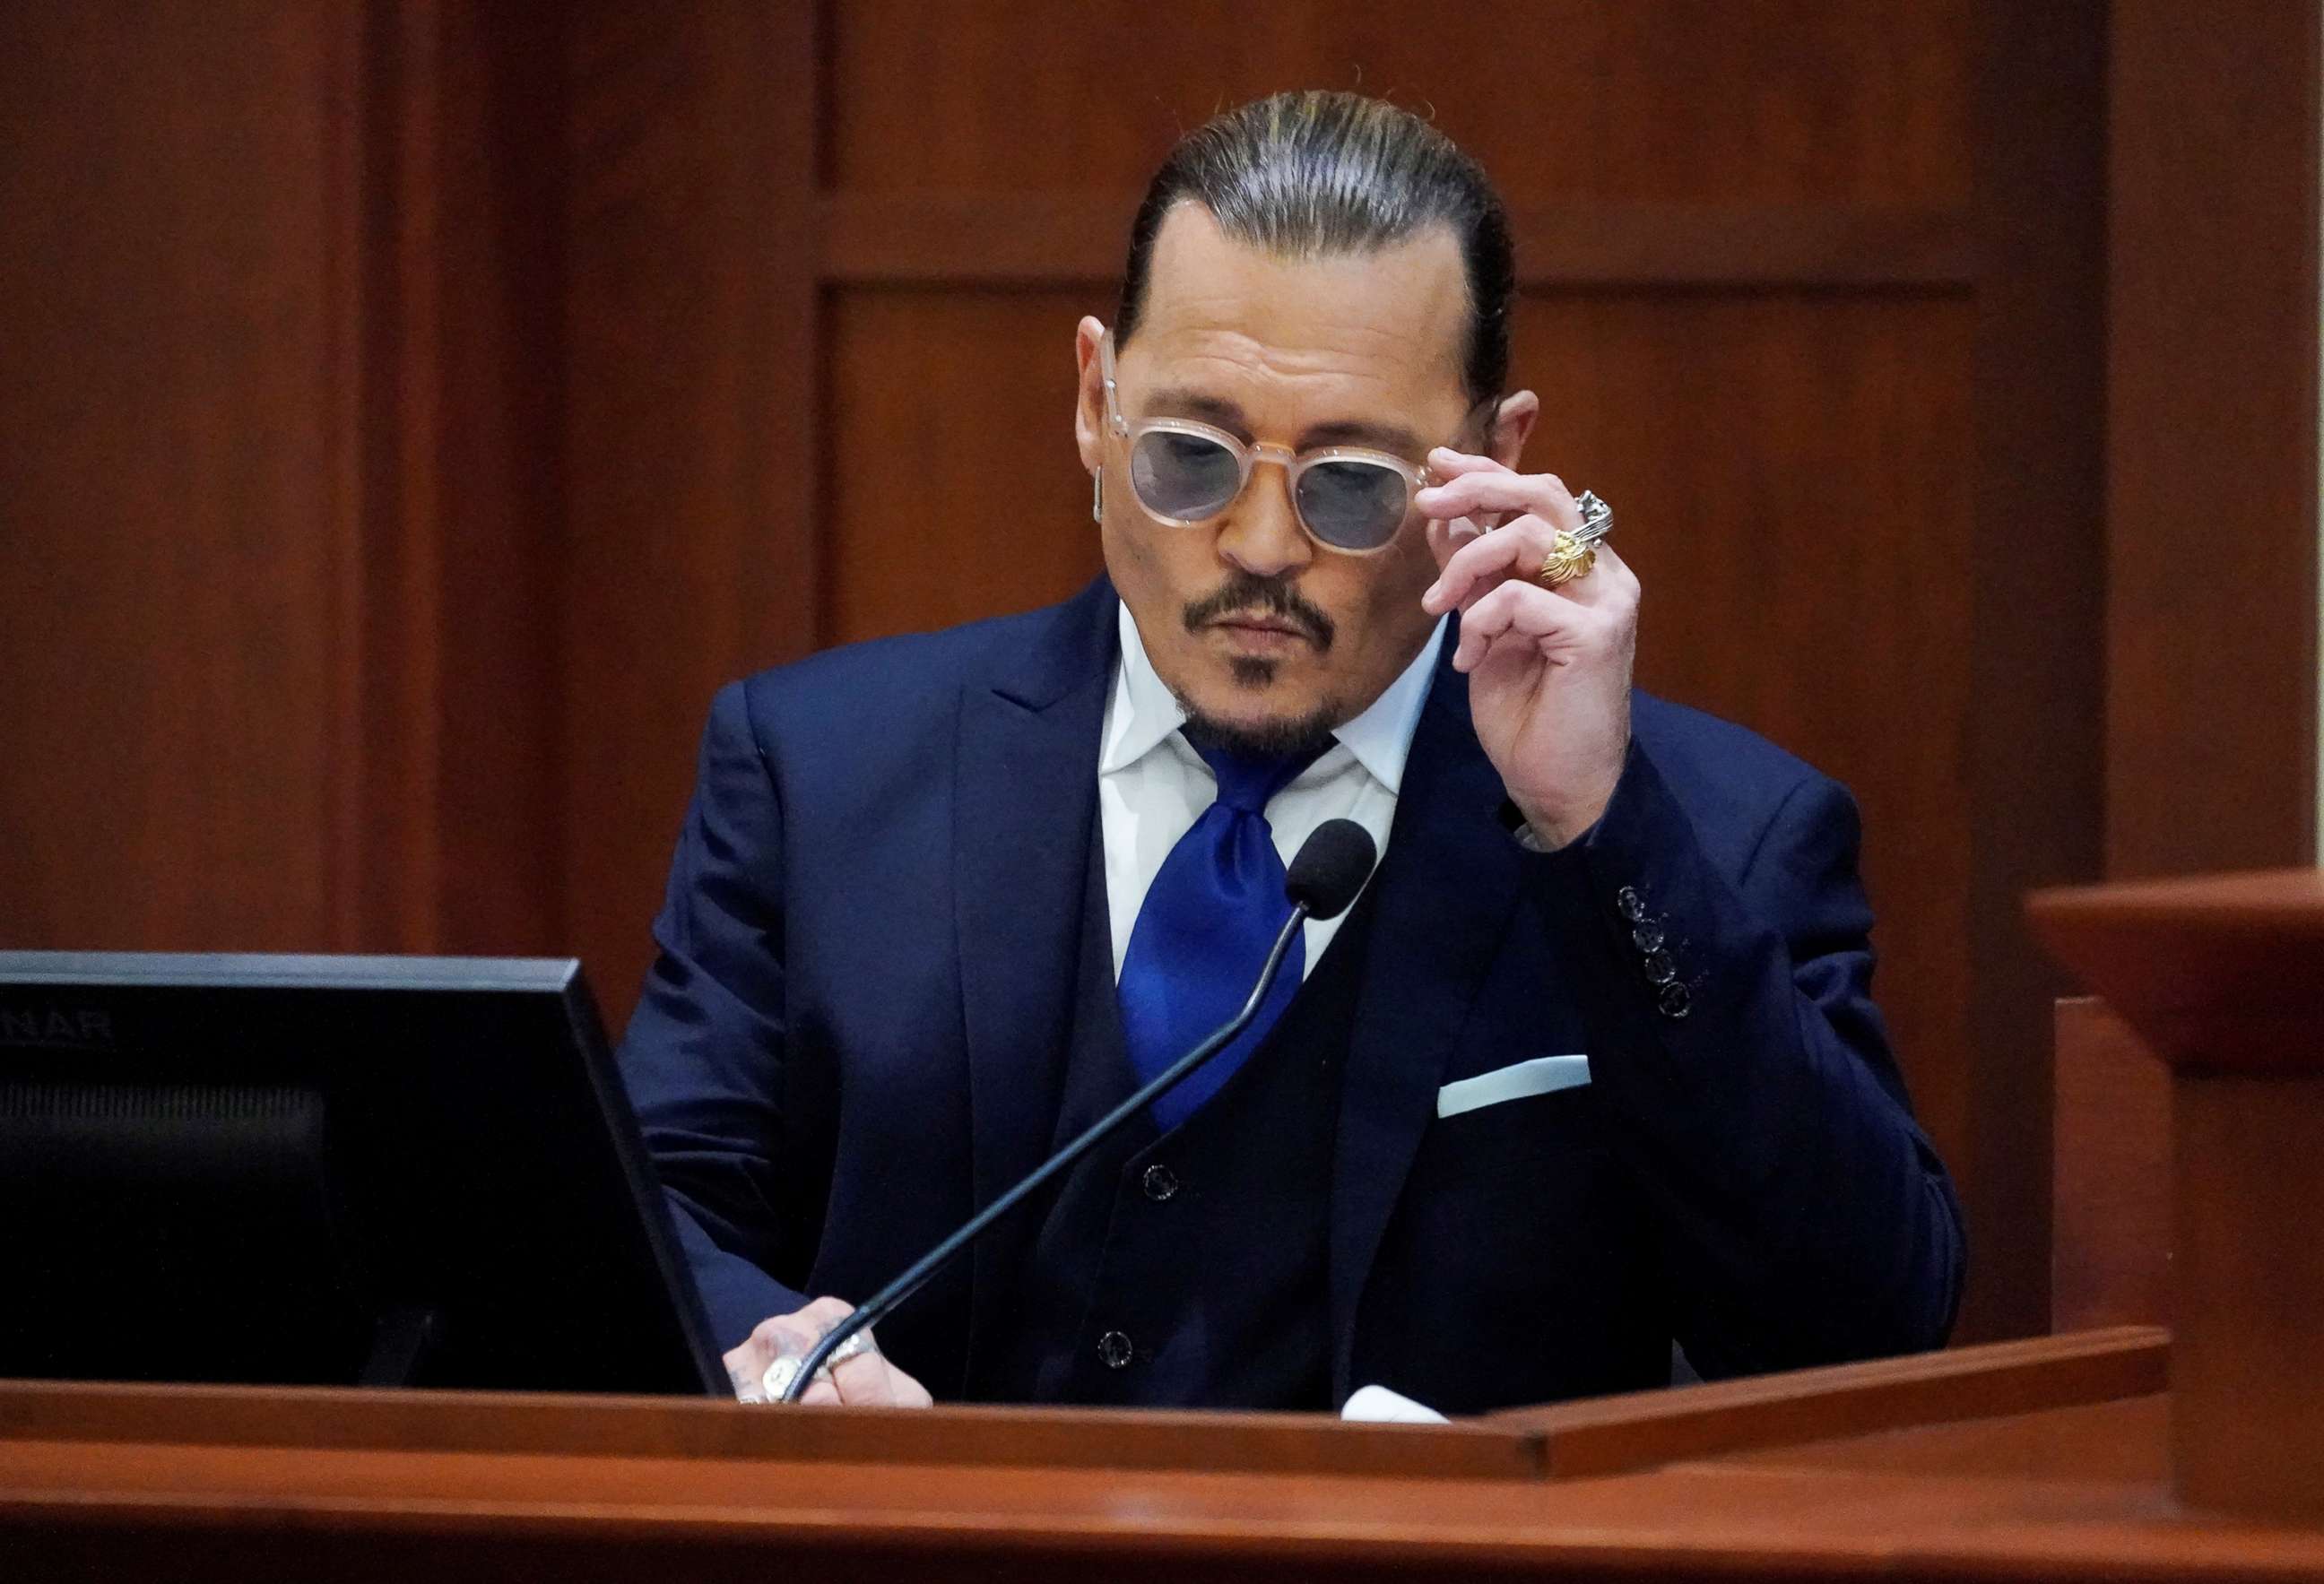 PHOTO: Actor Johnny Depp sits to testify in the courtroom at the Fairfax County Circuit Courthouse in Fairfax, Va., April 25, 2022.